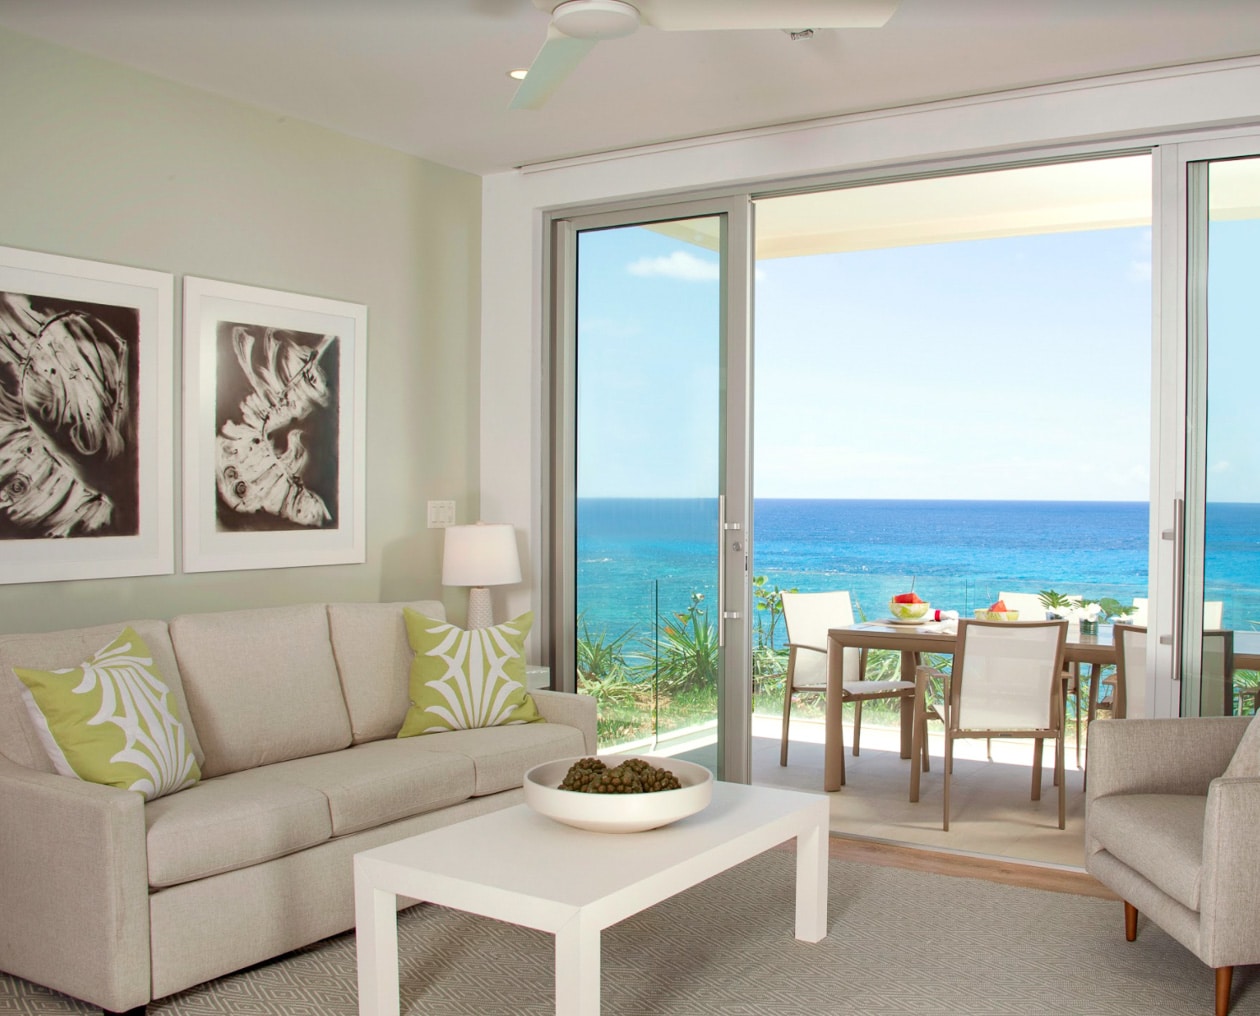 A living area with large glass doors leading to an outdoor dining area with an ocean view.